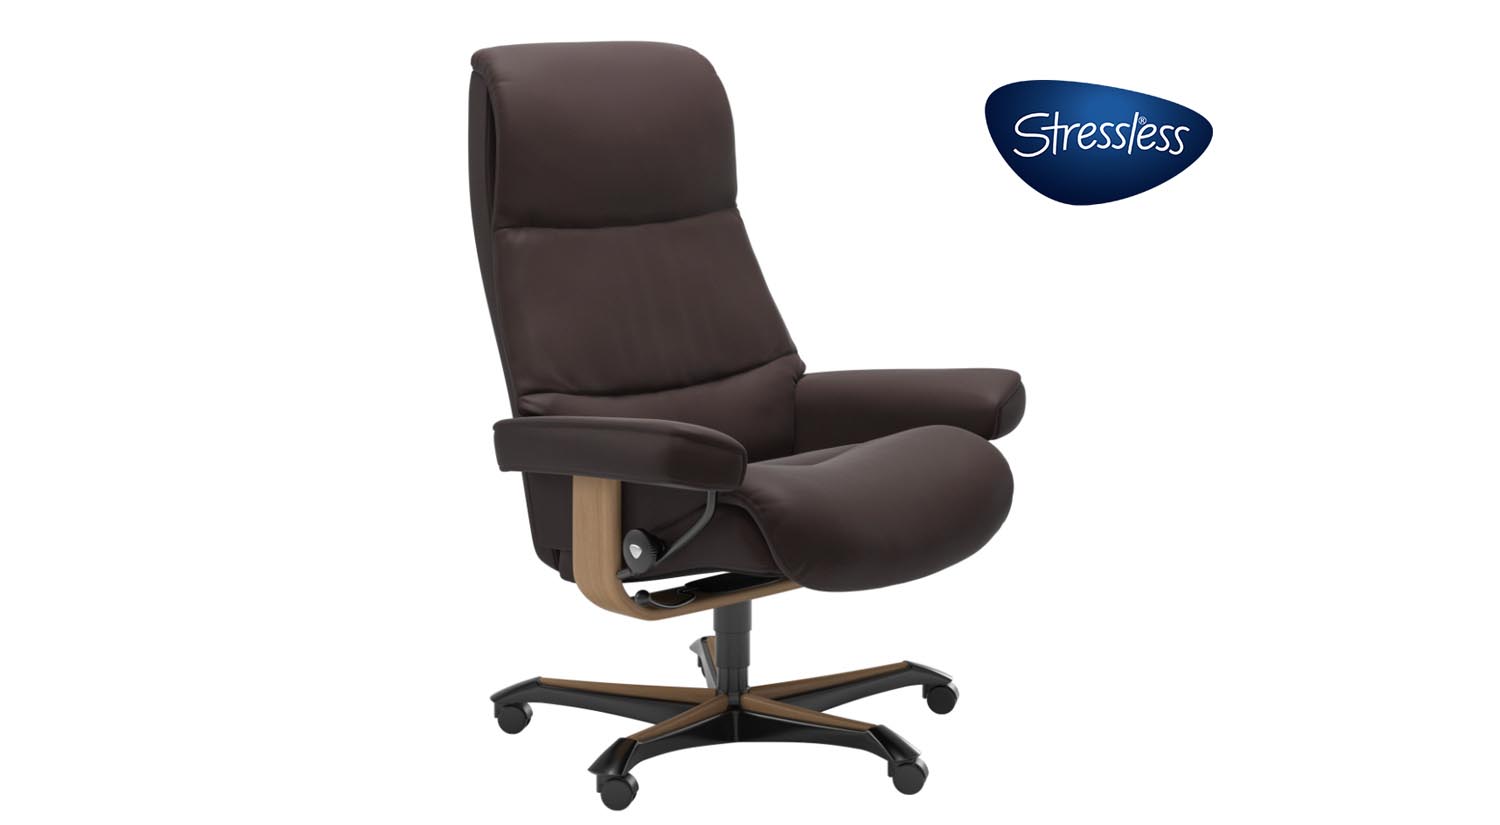 https://www.circlefurniture.com/userfiles/images/Products/ekornes/view/view-office-logo-main.jpg